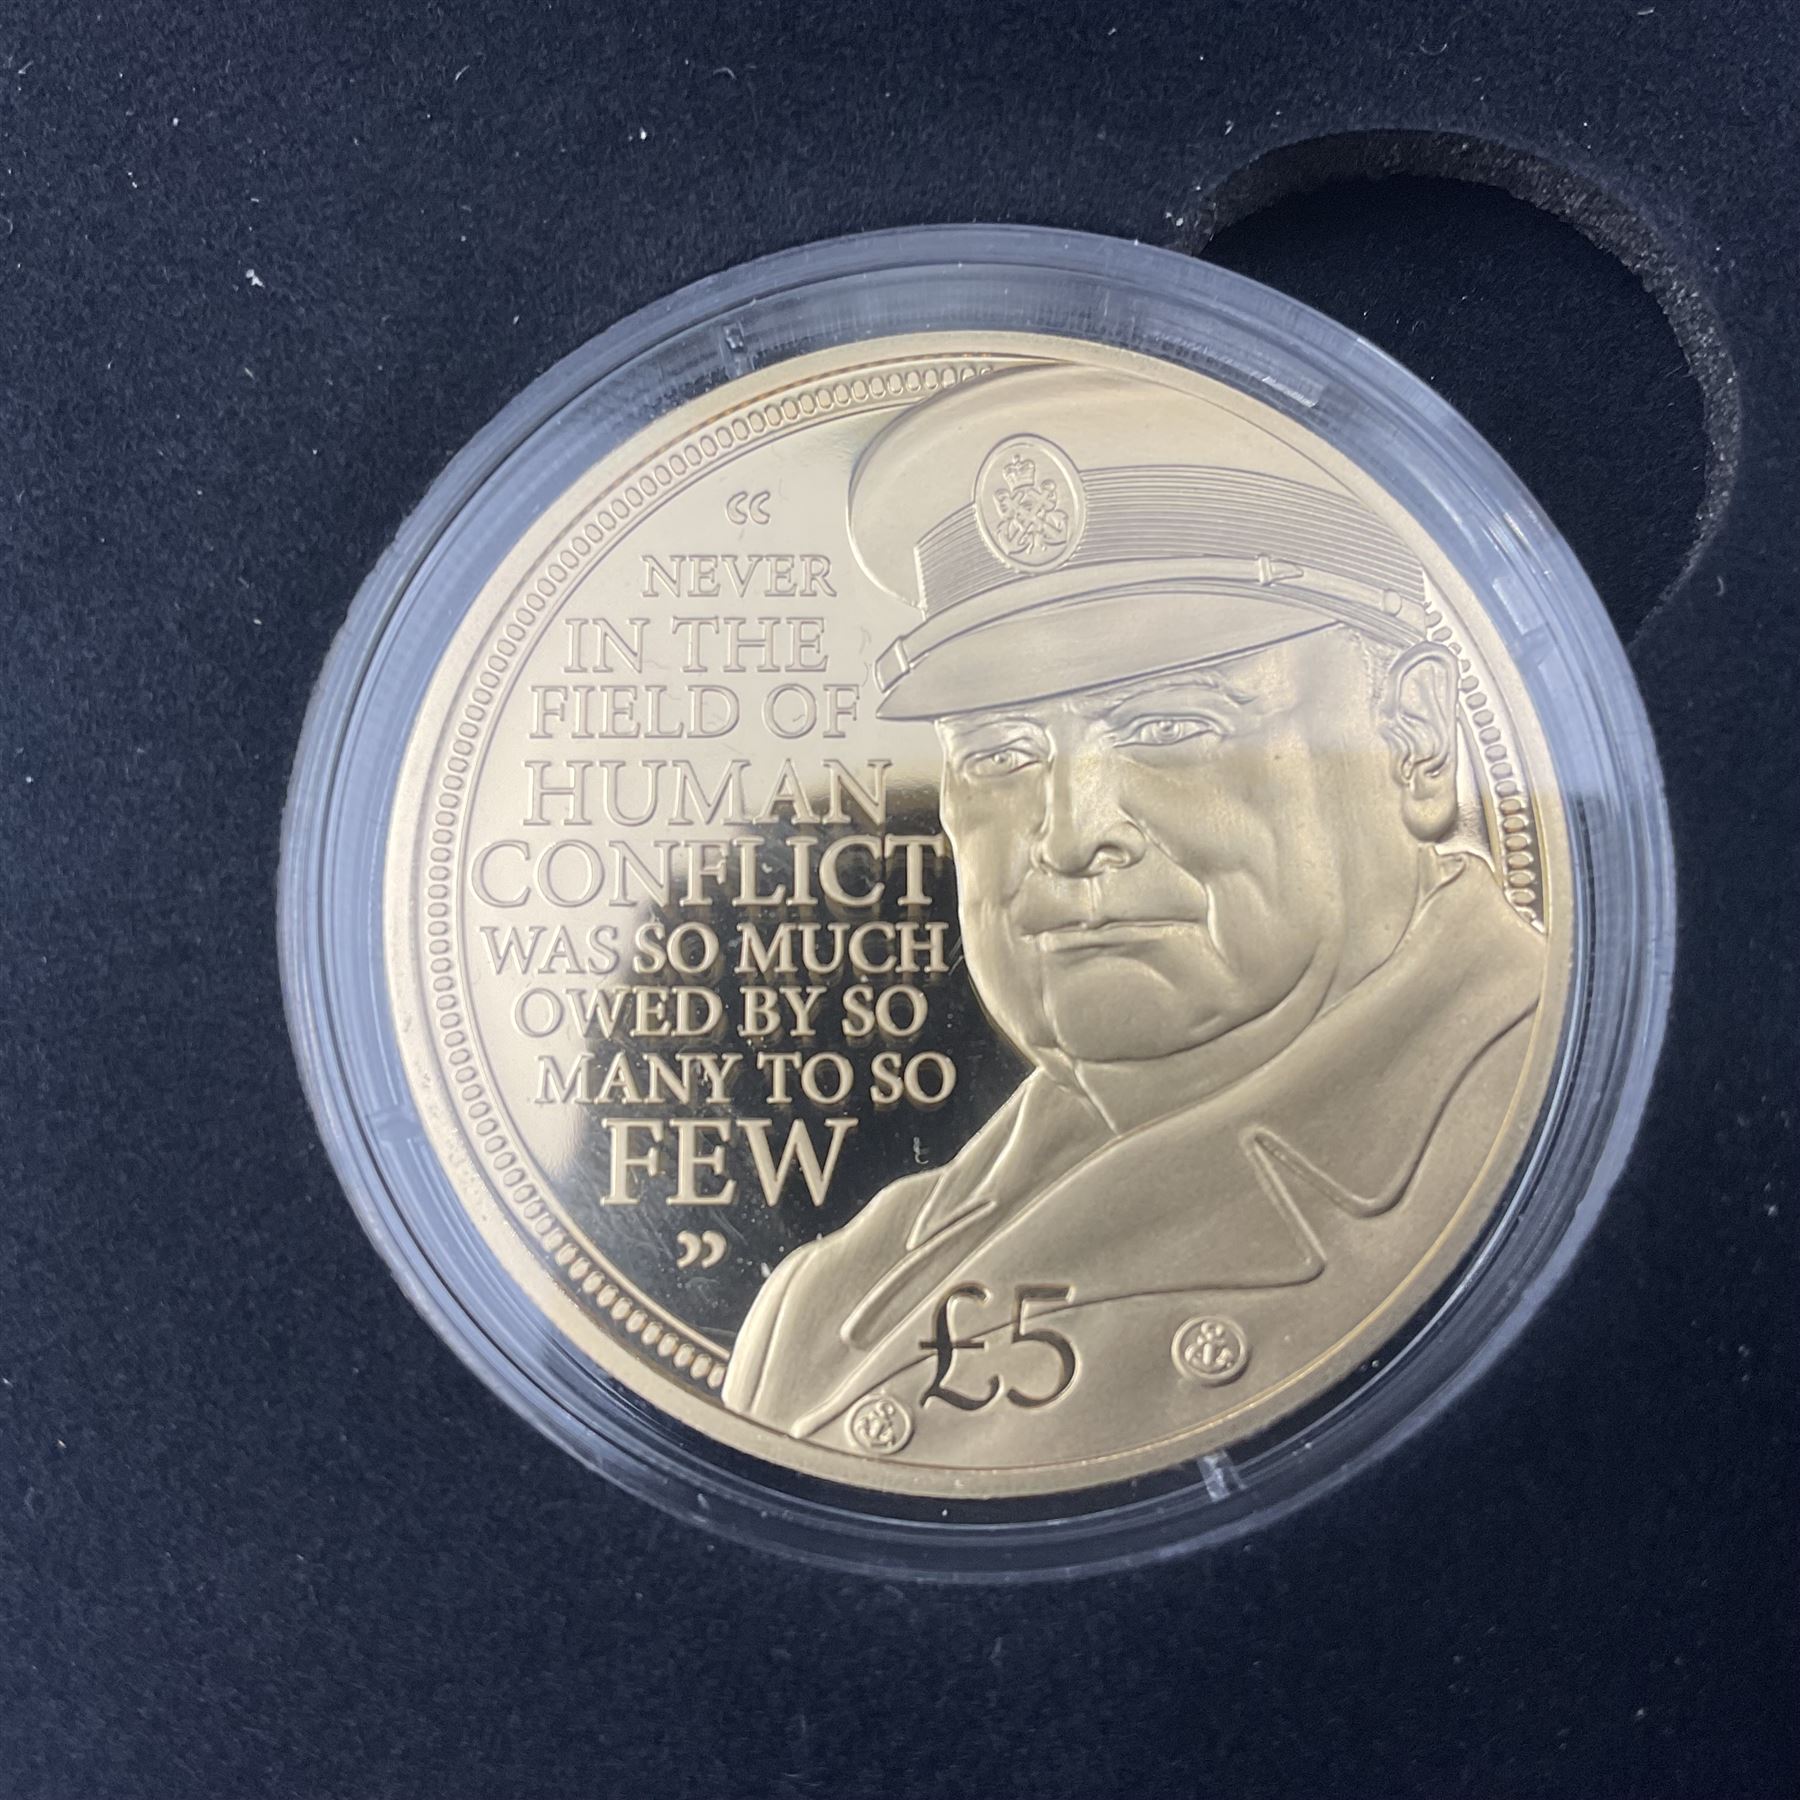 Queen Elizabeth II Bailiwick of Jersey 2015 'Sir Winston Churchill' gold proof five pound coin - Image 2 of 6